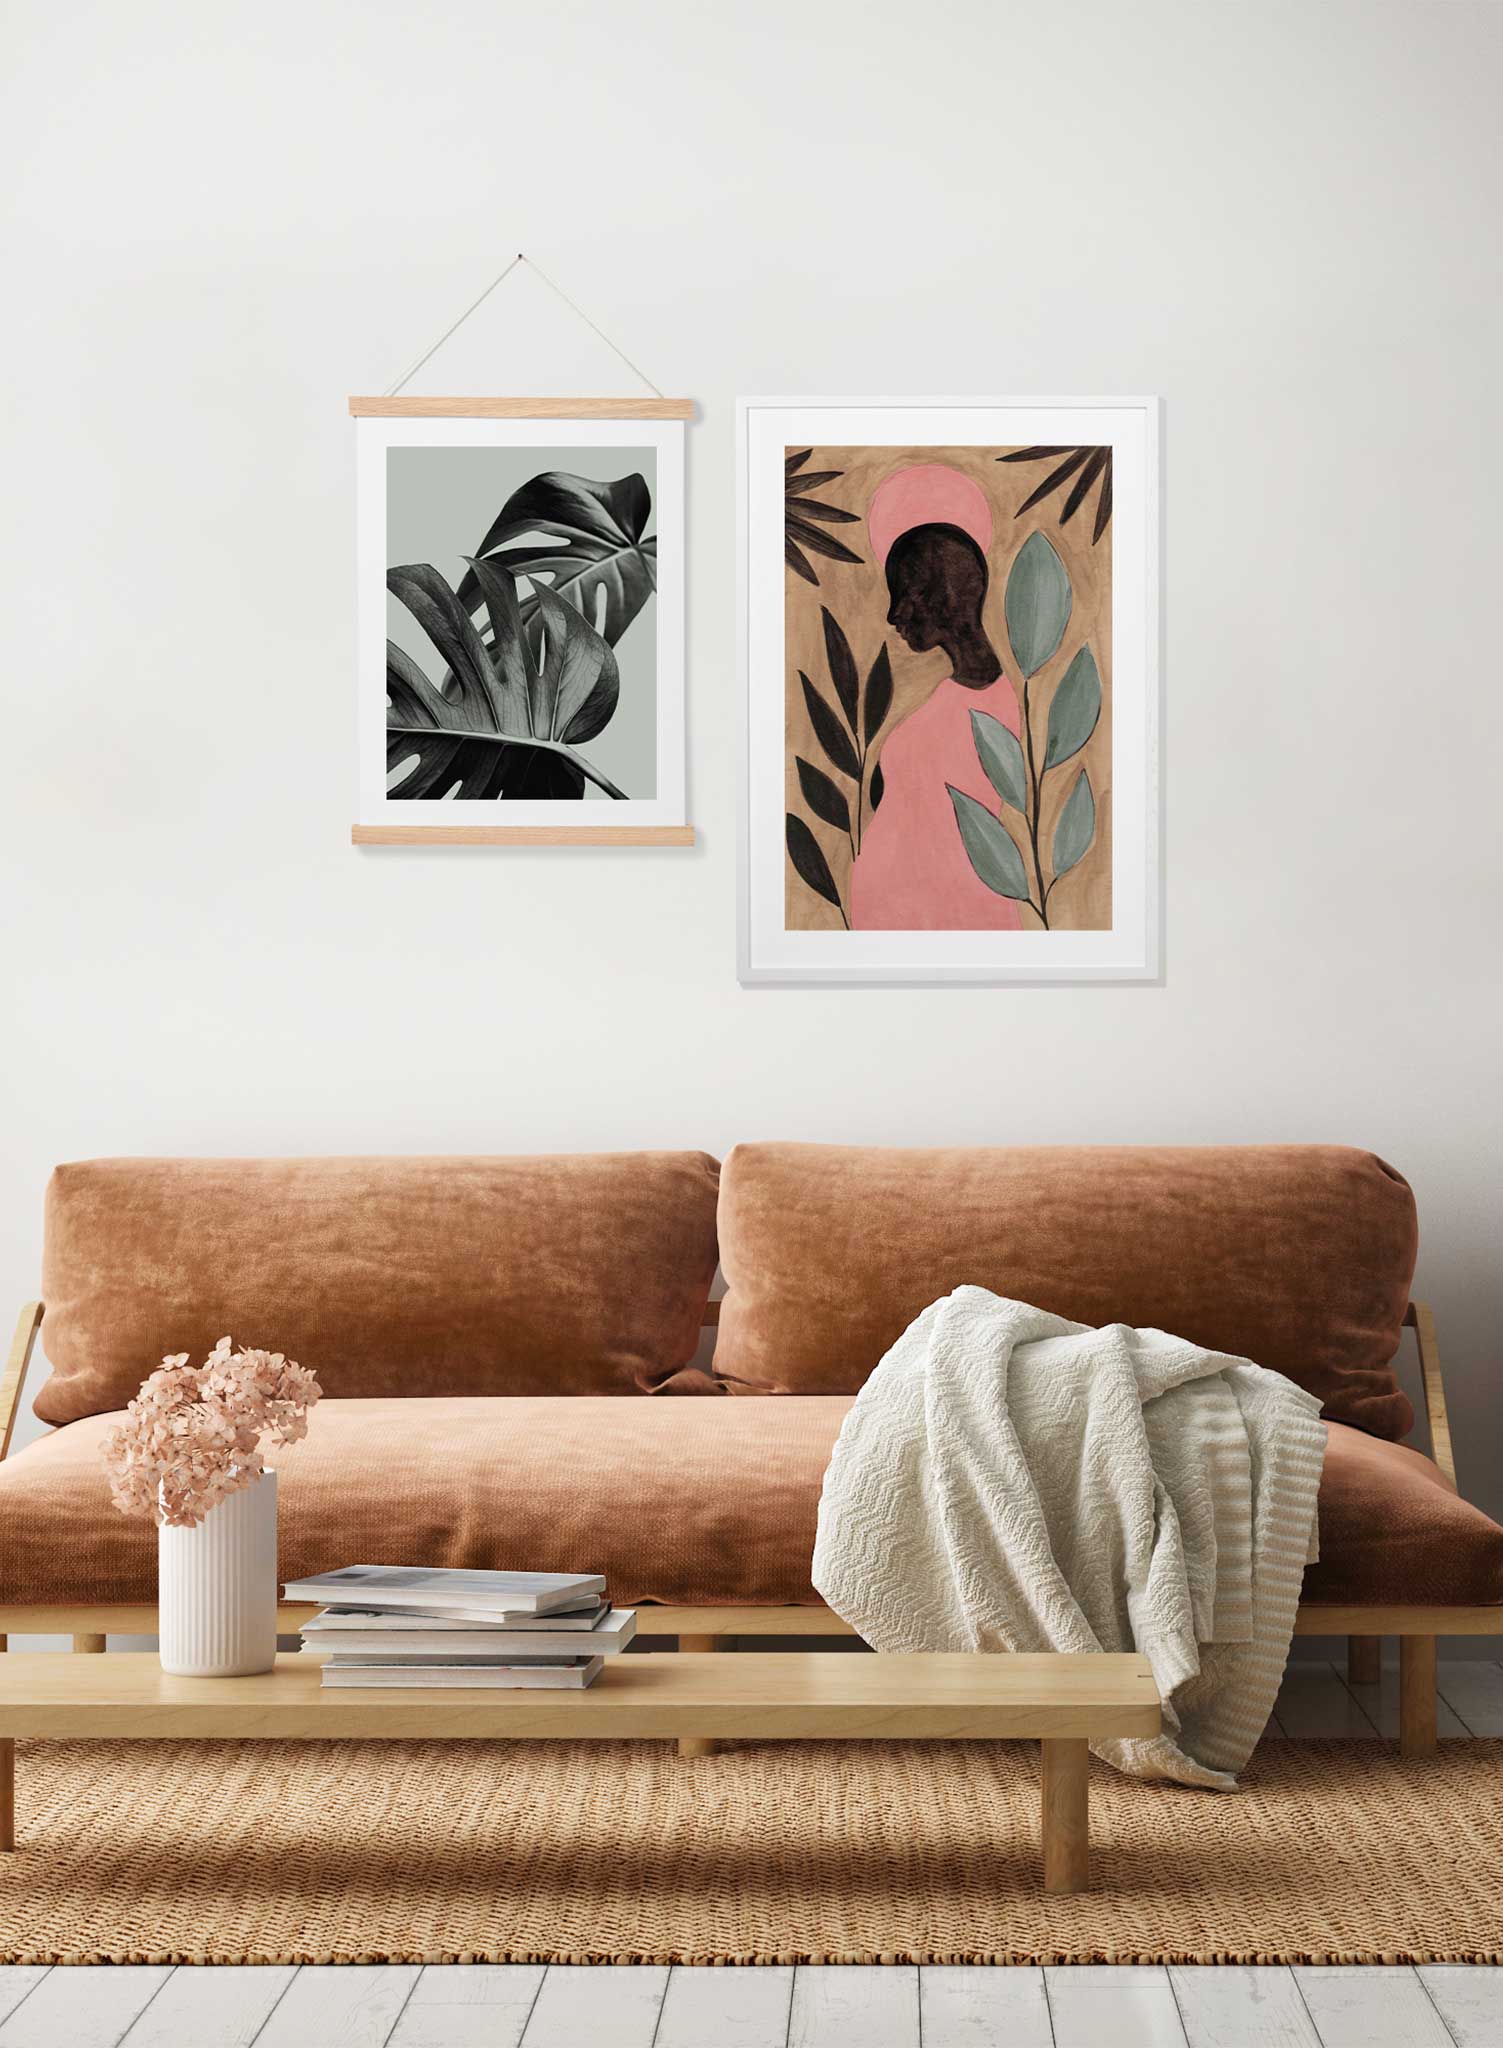 Ala is a minimalist illustration of a woman wearing a pink dress where her baby bump can be seen as she stands in the jungle by Opposite Wall.